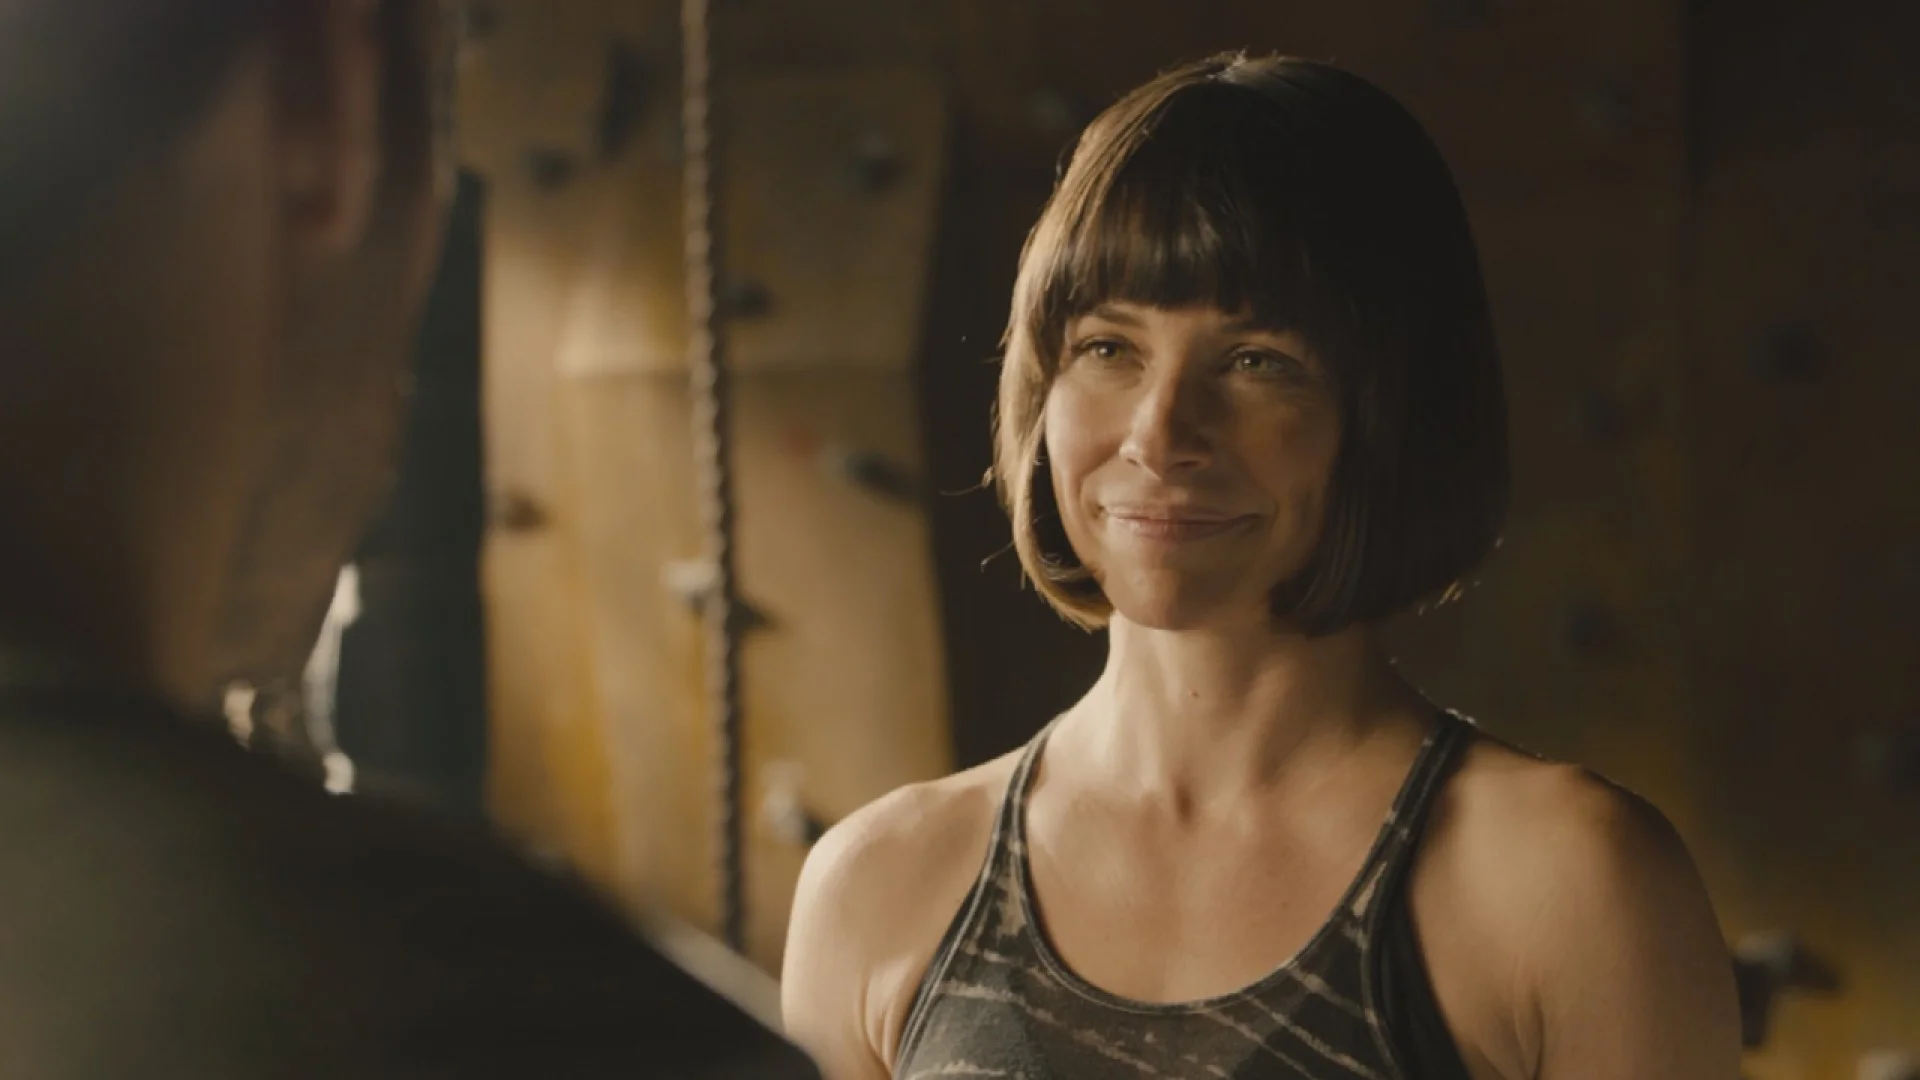 Evangeline Lilly is synonymous with her role of The Wasp in the Ant-Man franchise